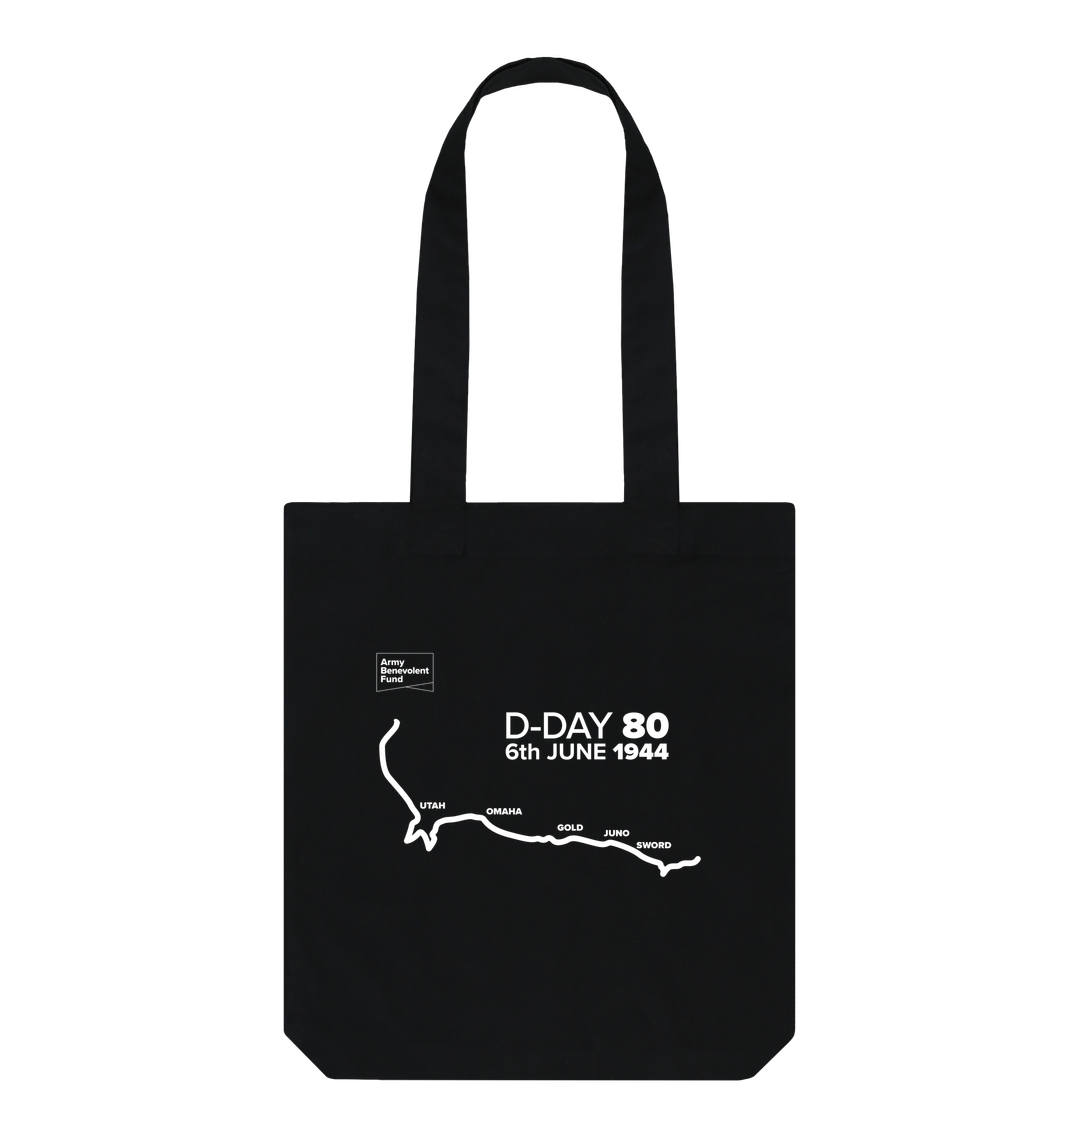 D-Day 80 map tote bag - Army Benevolent Fund